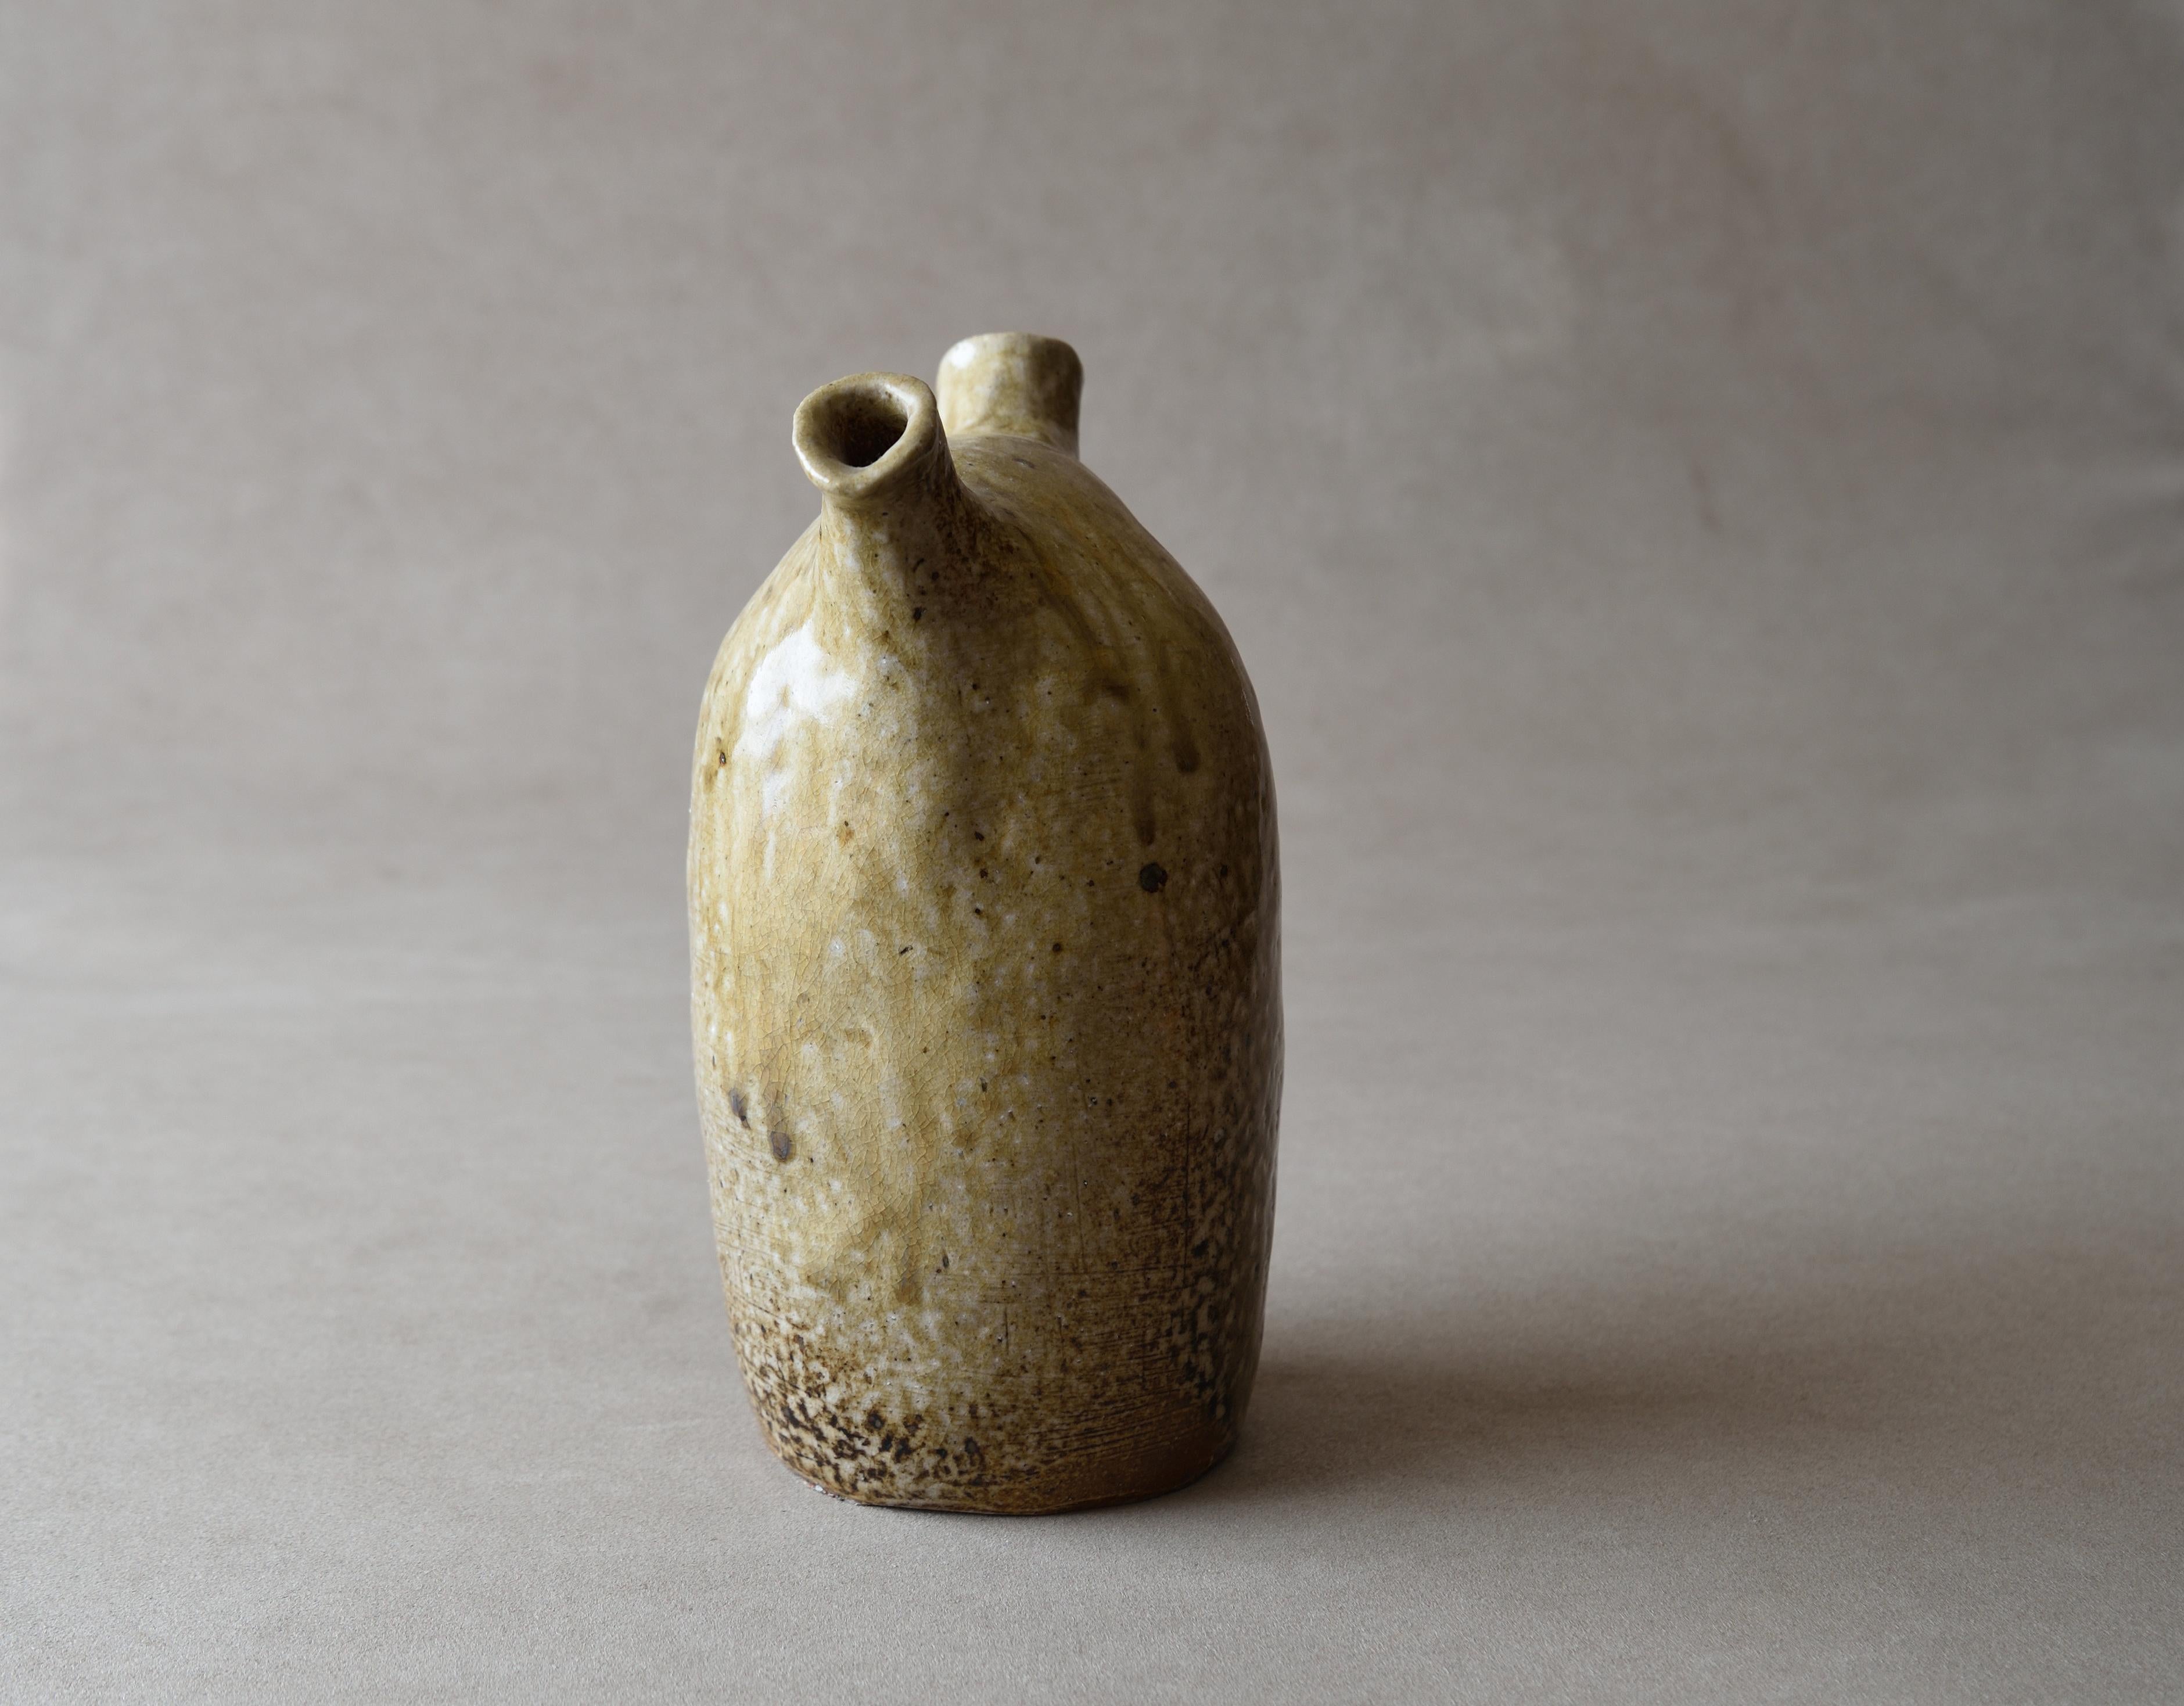 DOUBLE-MOUTHED VASE – Japanese vintage modern pottery vase with two spouts, Showa period, 20th century, approx. H 23 x W 18 x D 11cm (9.05 x 7.08 x 4.33in). Unidentified potter’s carved seal at lower part.